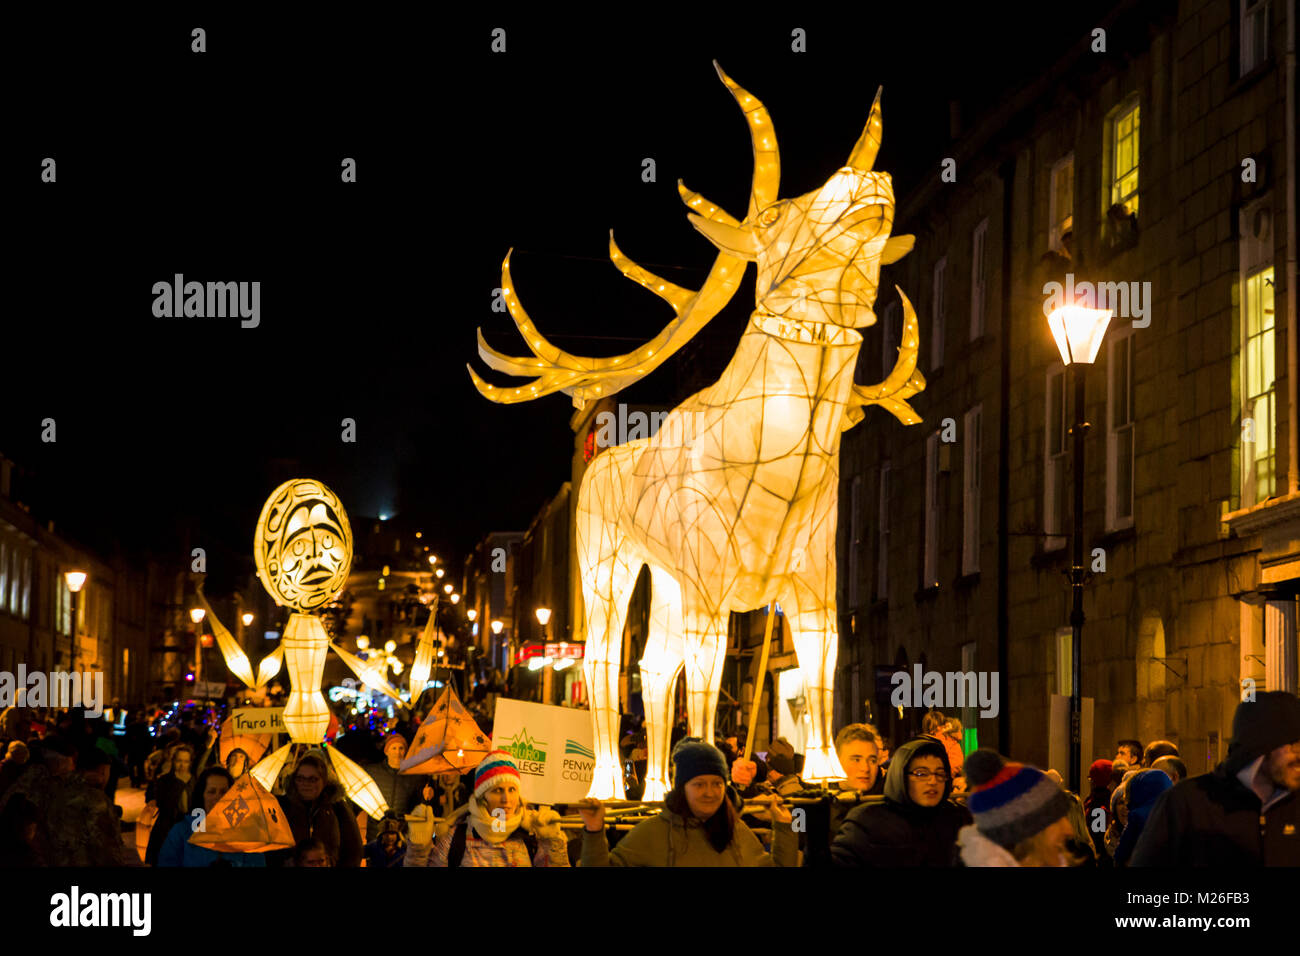 Editorial: Members of the public inc children. Truro, Cornwall, UK 01/31/2018. Truro Festival Of Lights is an annual event hailed as the start of Chri Stock Photo